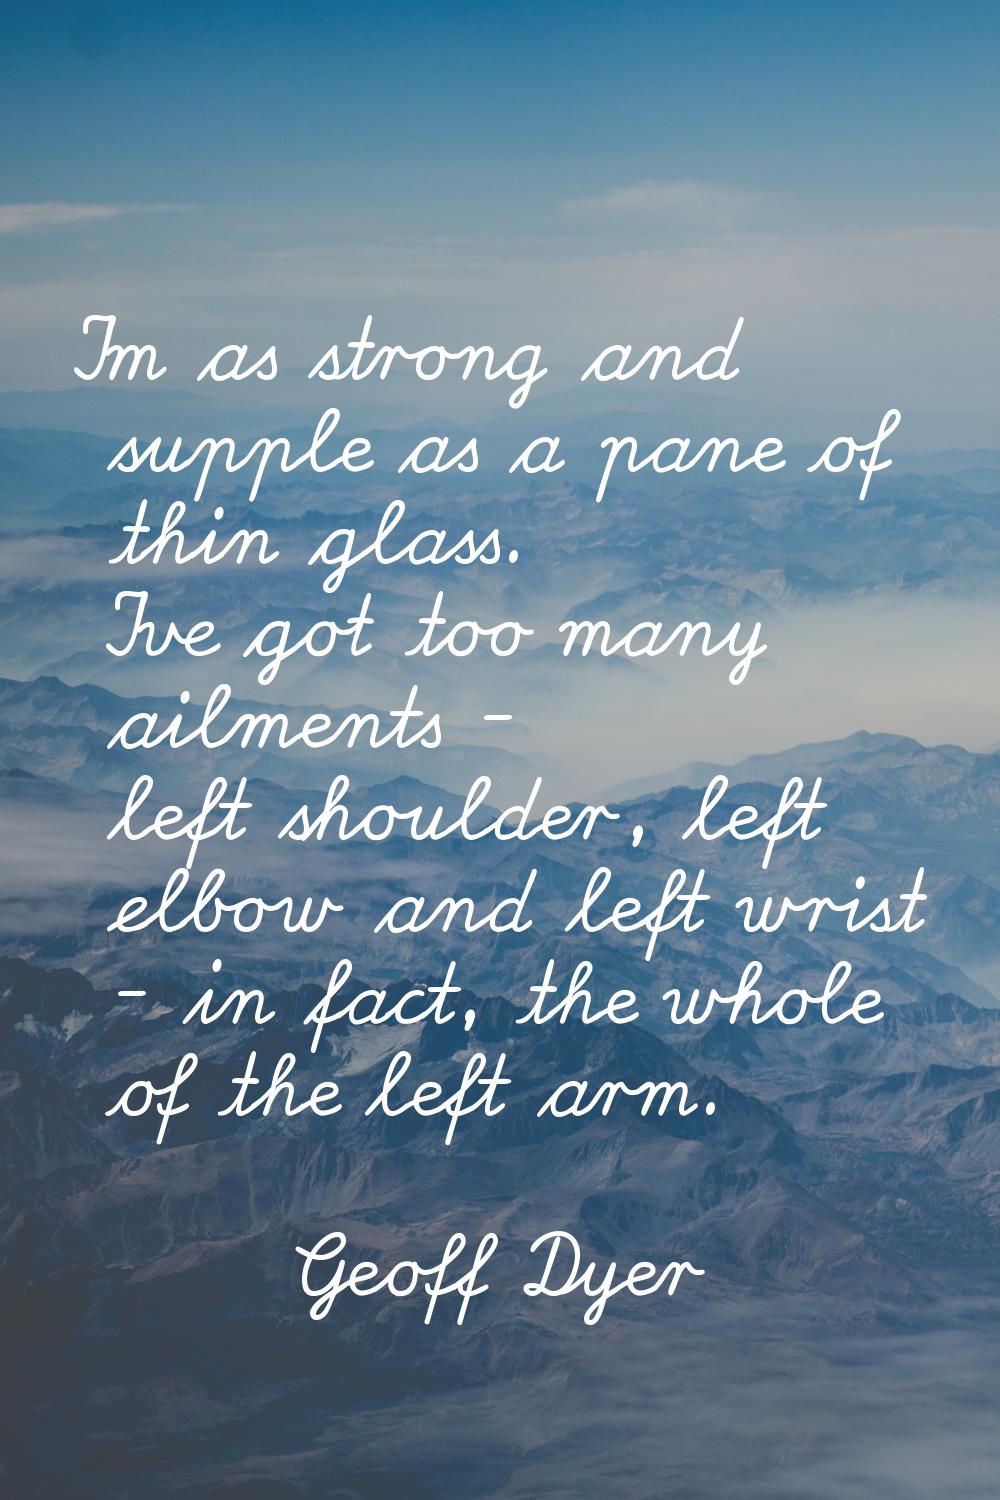 I'm as strong and supple as a pane of thin glass. I've got too many ailments - left shoulder, left 